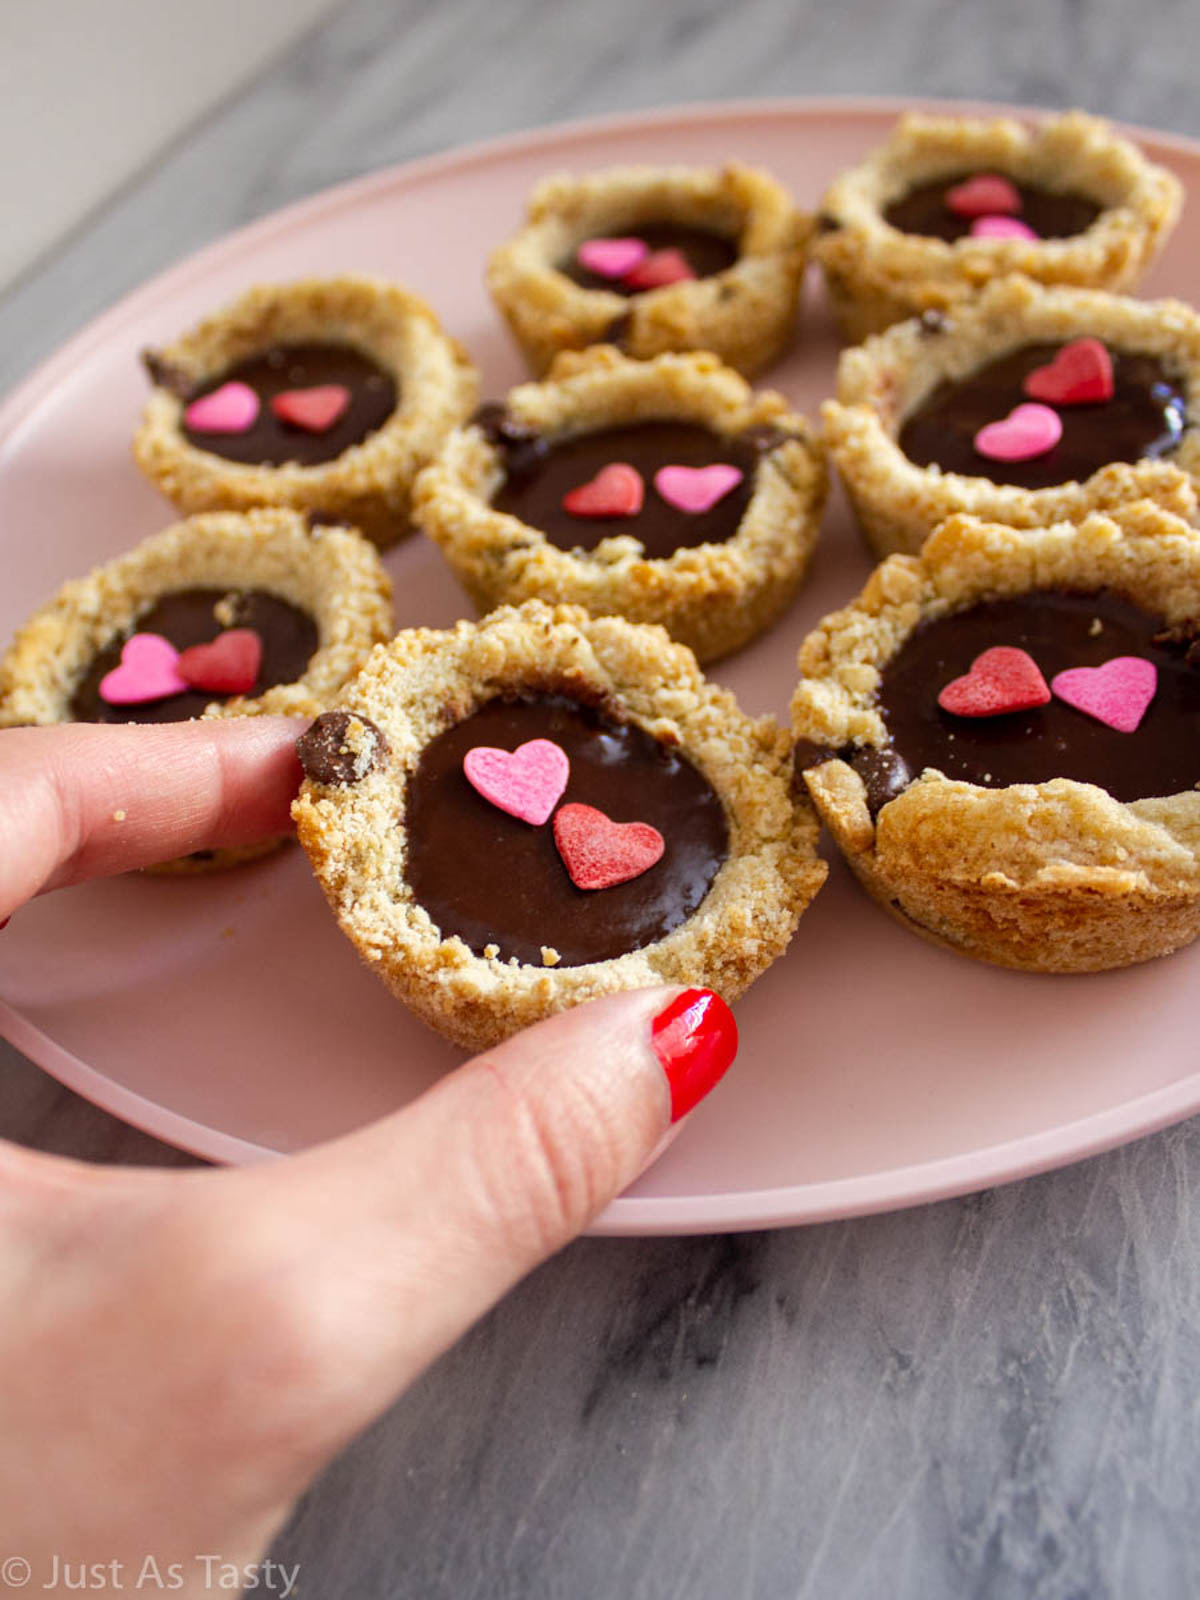 Chocolate chip cookies filled with ganache on a pink plate.